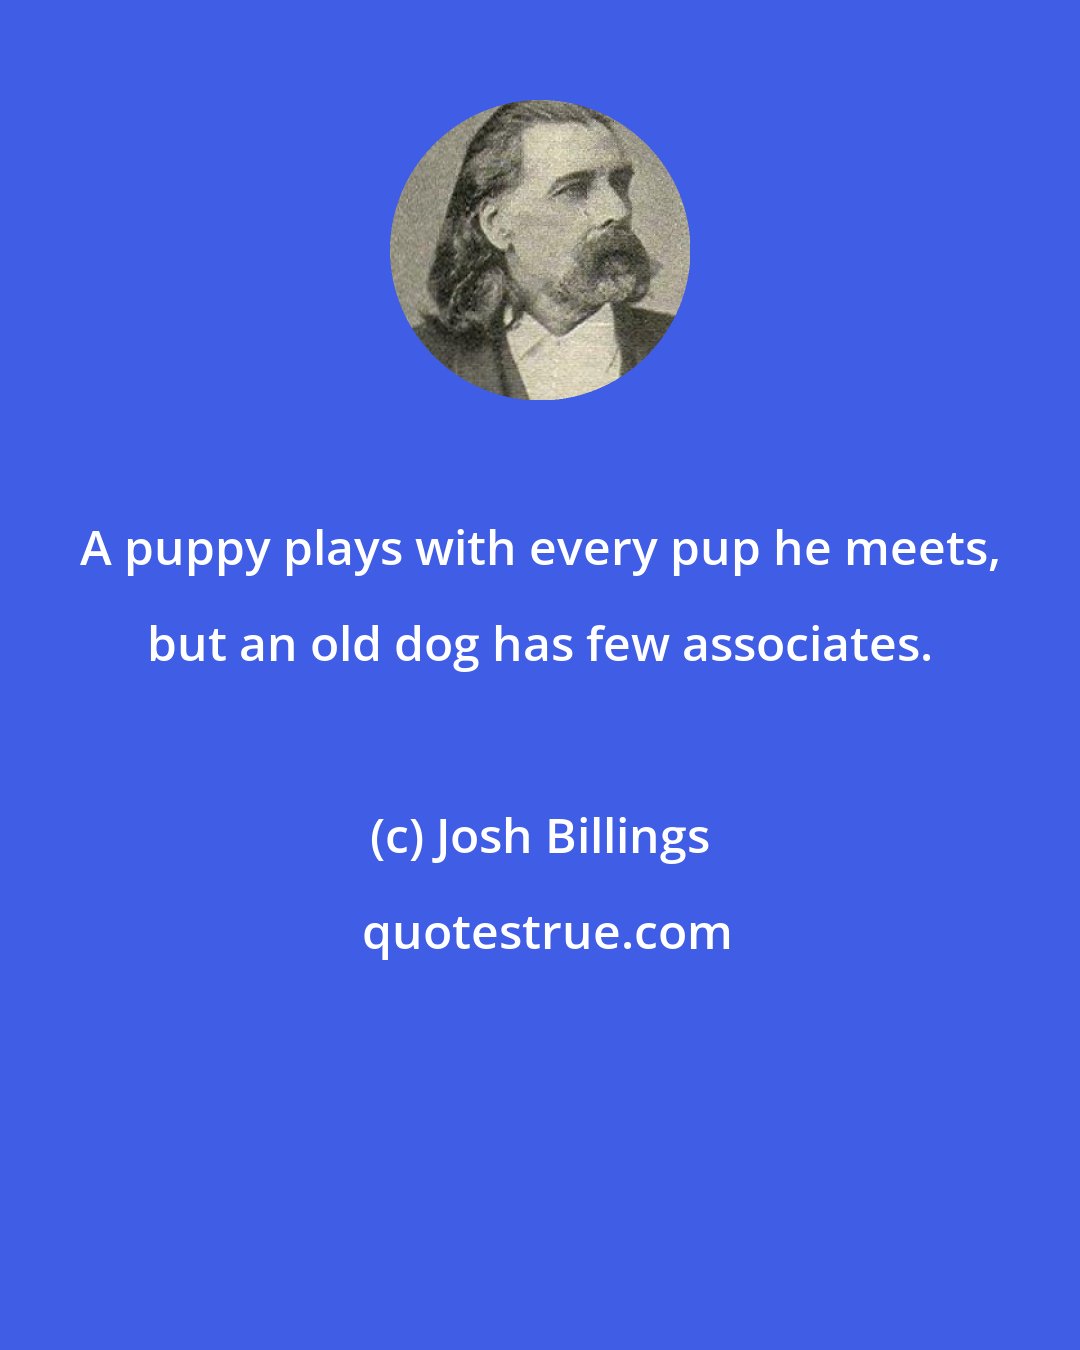 Josh Billings: A puppy plays with every pup he meets, but an old dog has few associates.